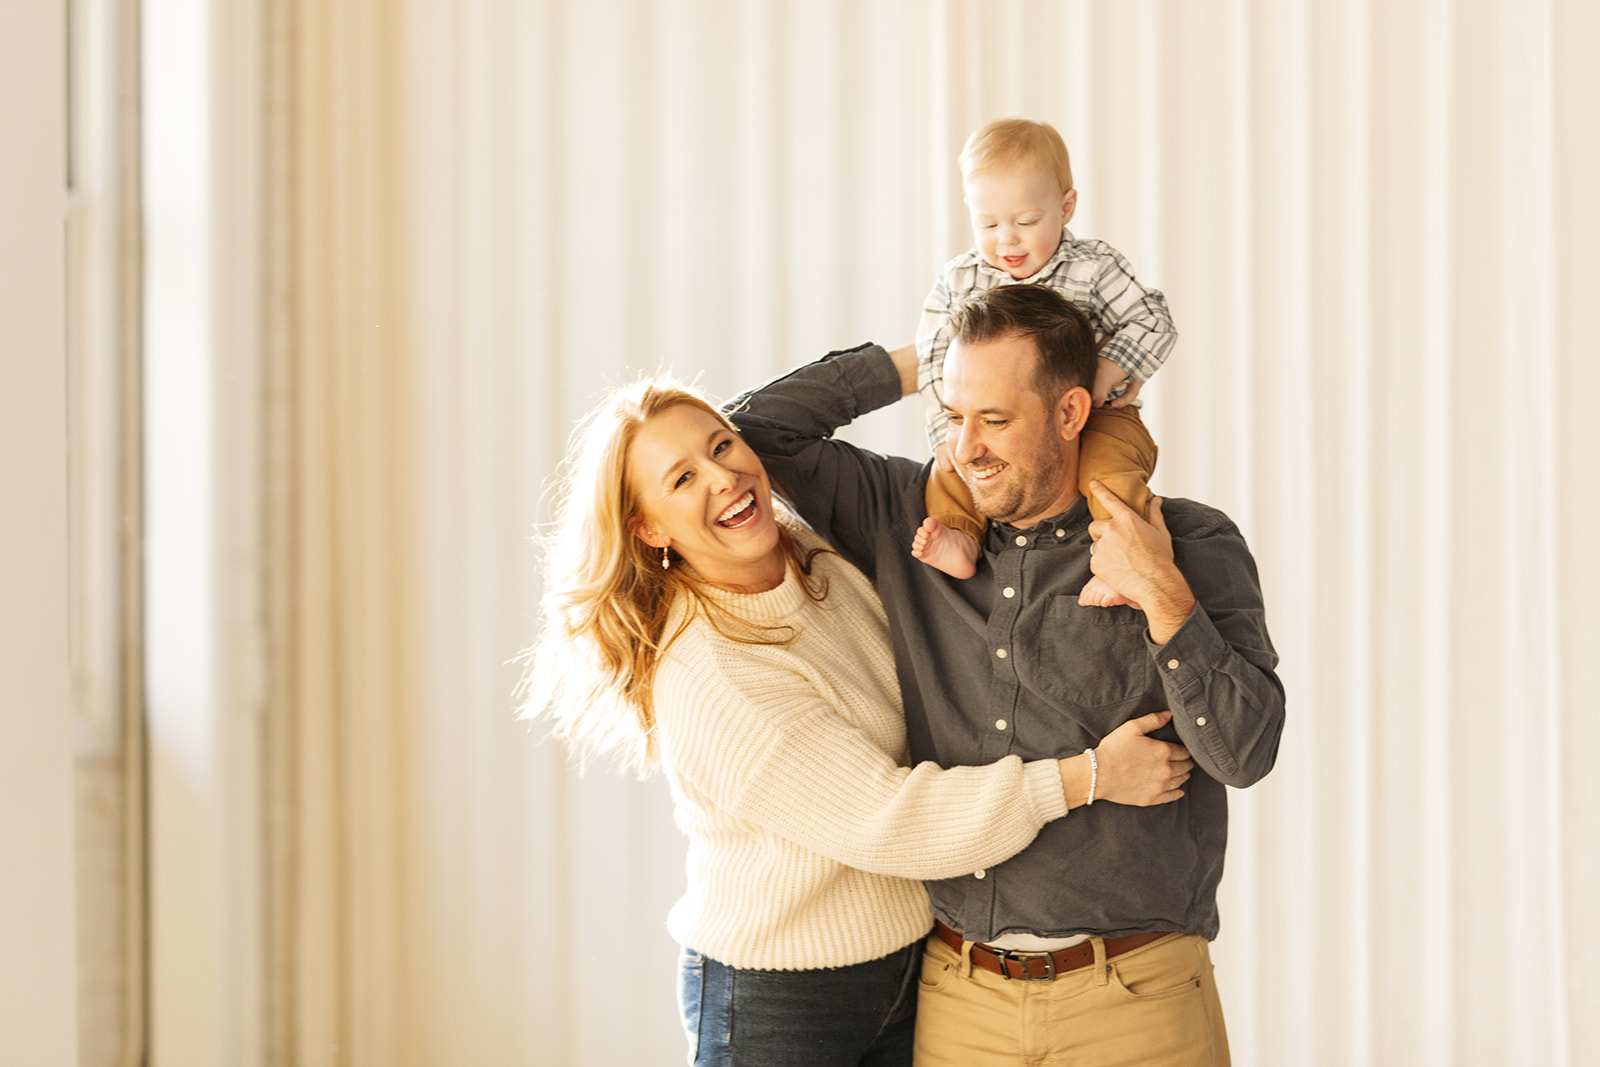 studio family photos with warm neutral outfit tones, small family with baby in denver colorado, family photography inspo